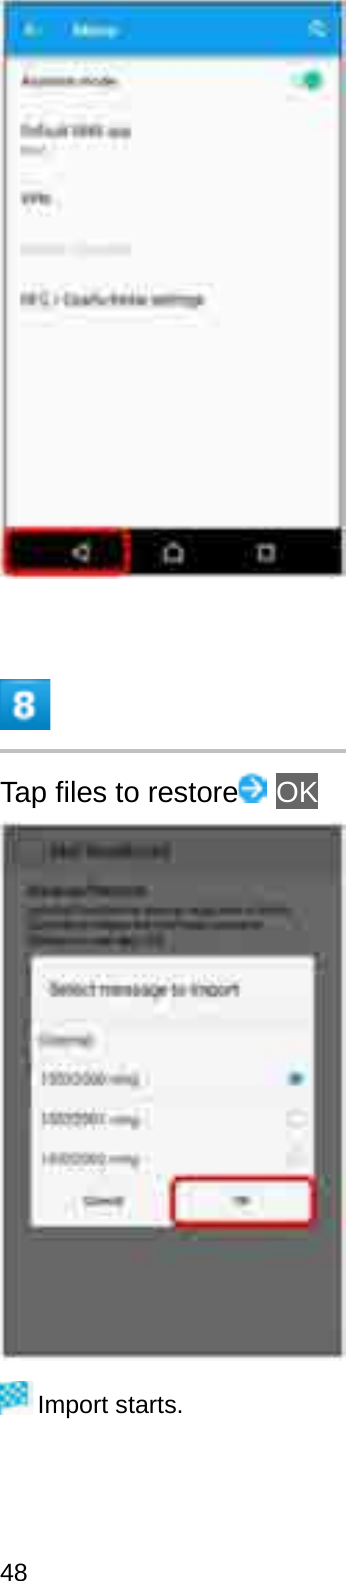 Tap files to restore OKImport starts.48